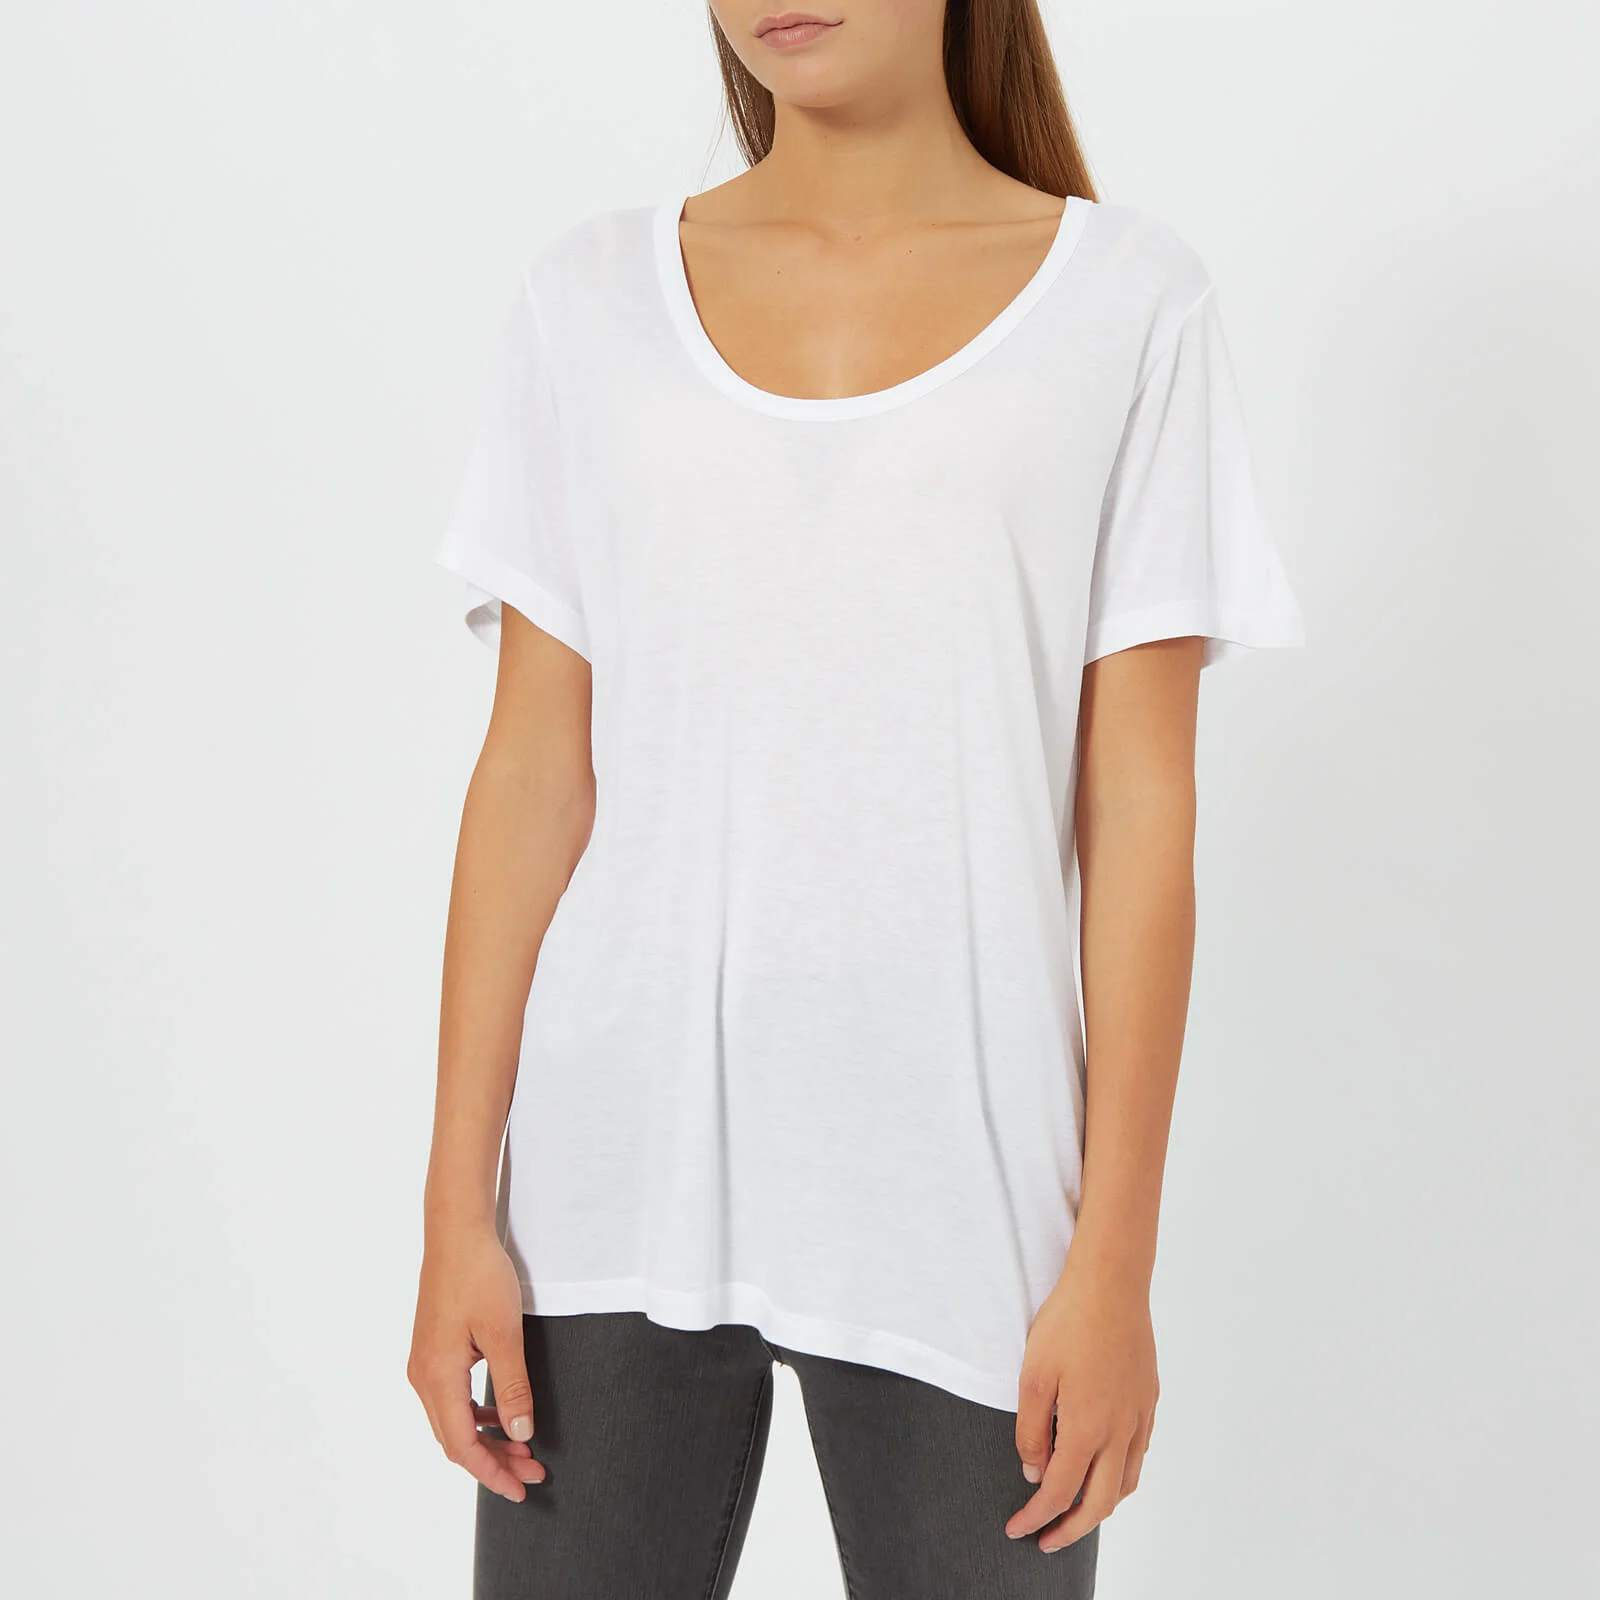 T by Alexander Wang Women's Drapey Jersey T-Shirt with T Darting Detail - Off White Image 1